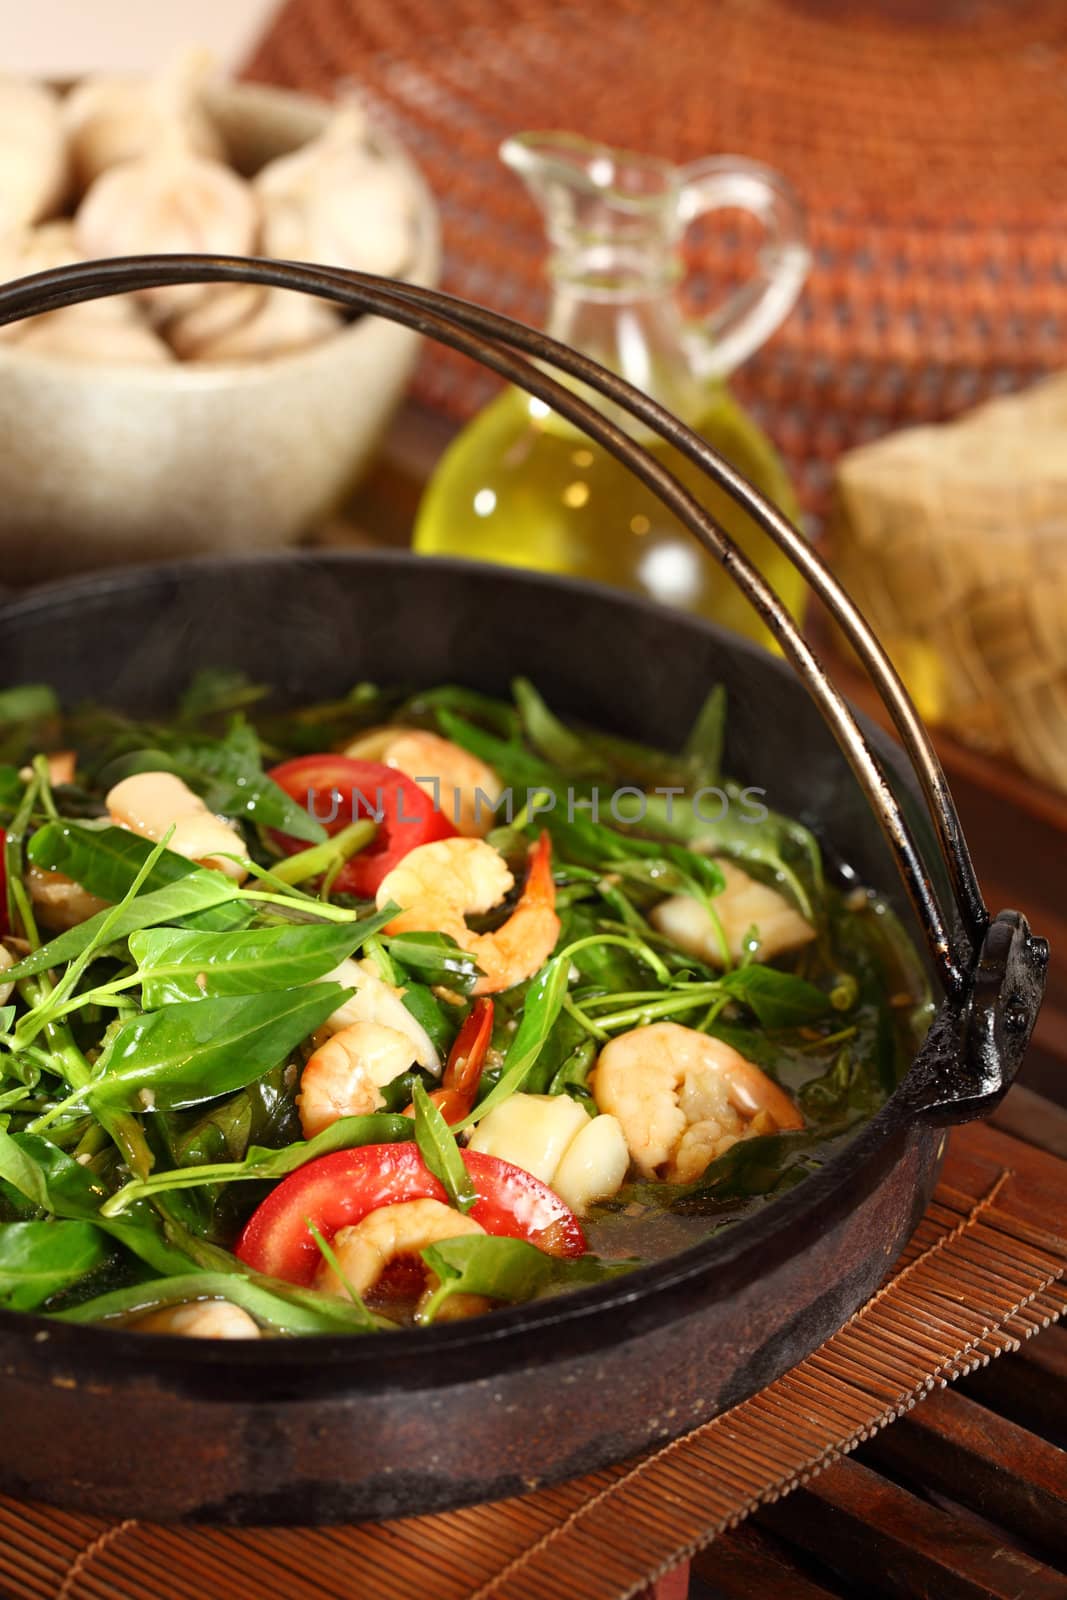 Hot plate seafood water spinach by photosoup